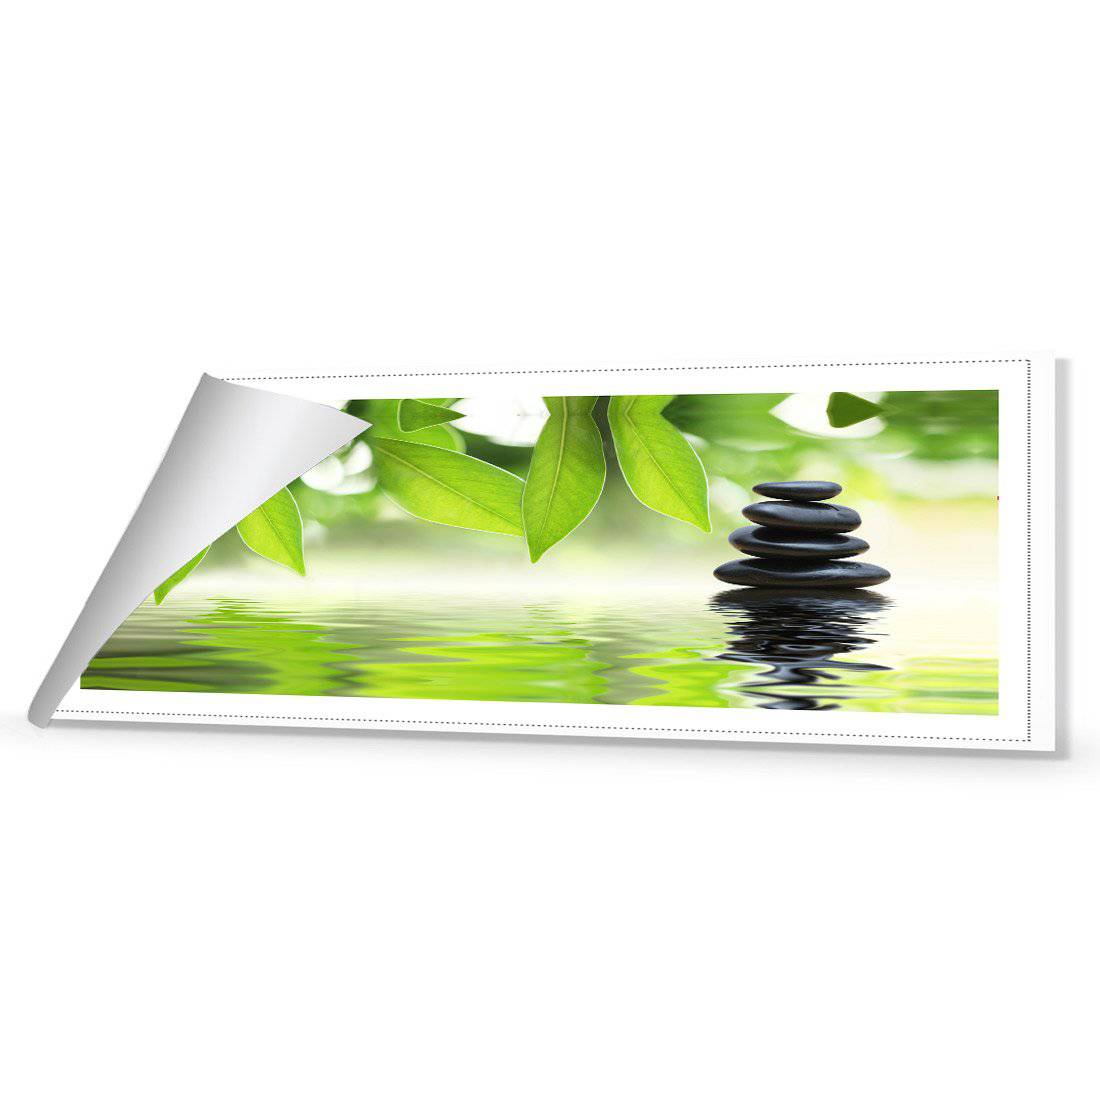 Stack Of Stones Canvas Art-Canvas-Wall Art Designs-60x20cm-Rolled Canvas-Wall Art Designs